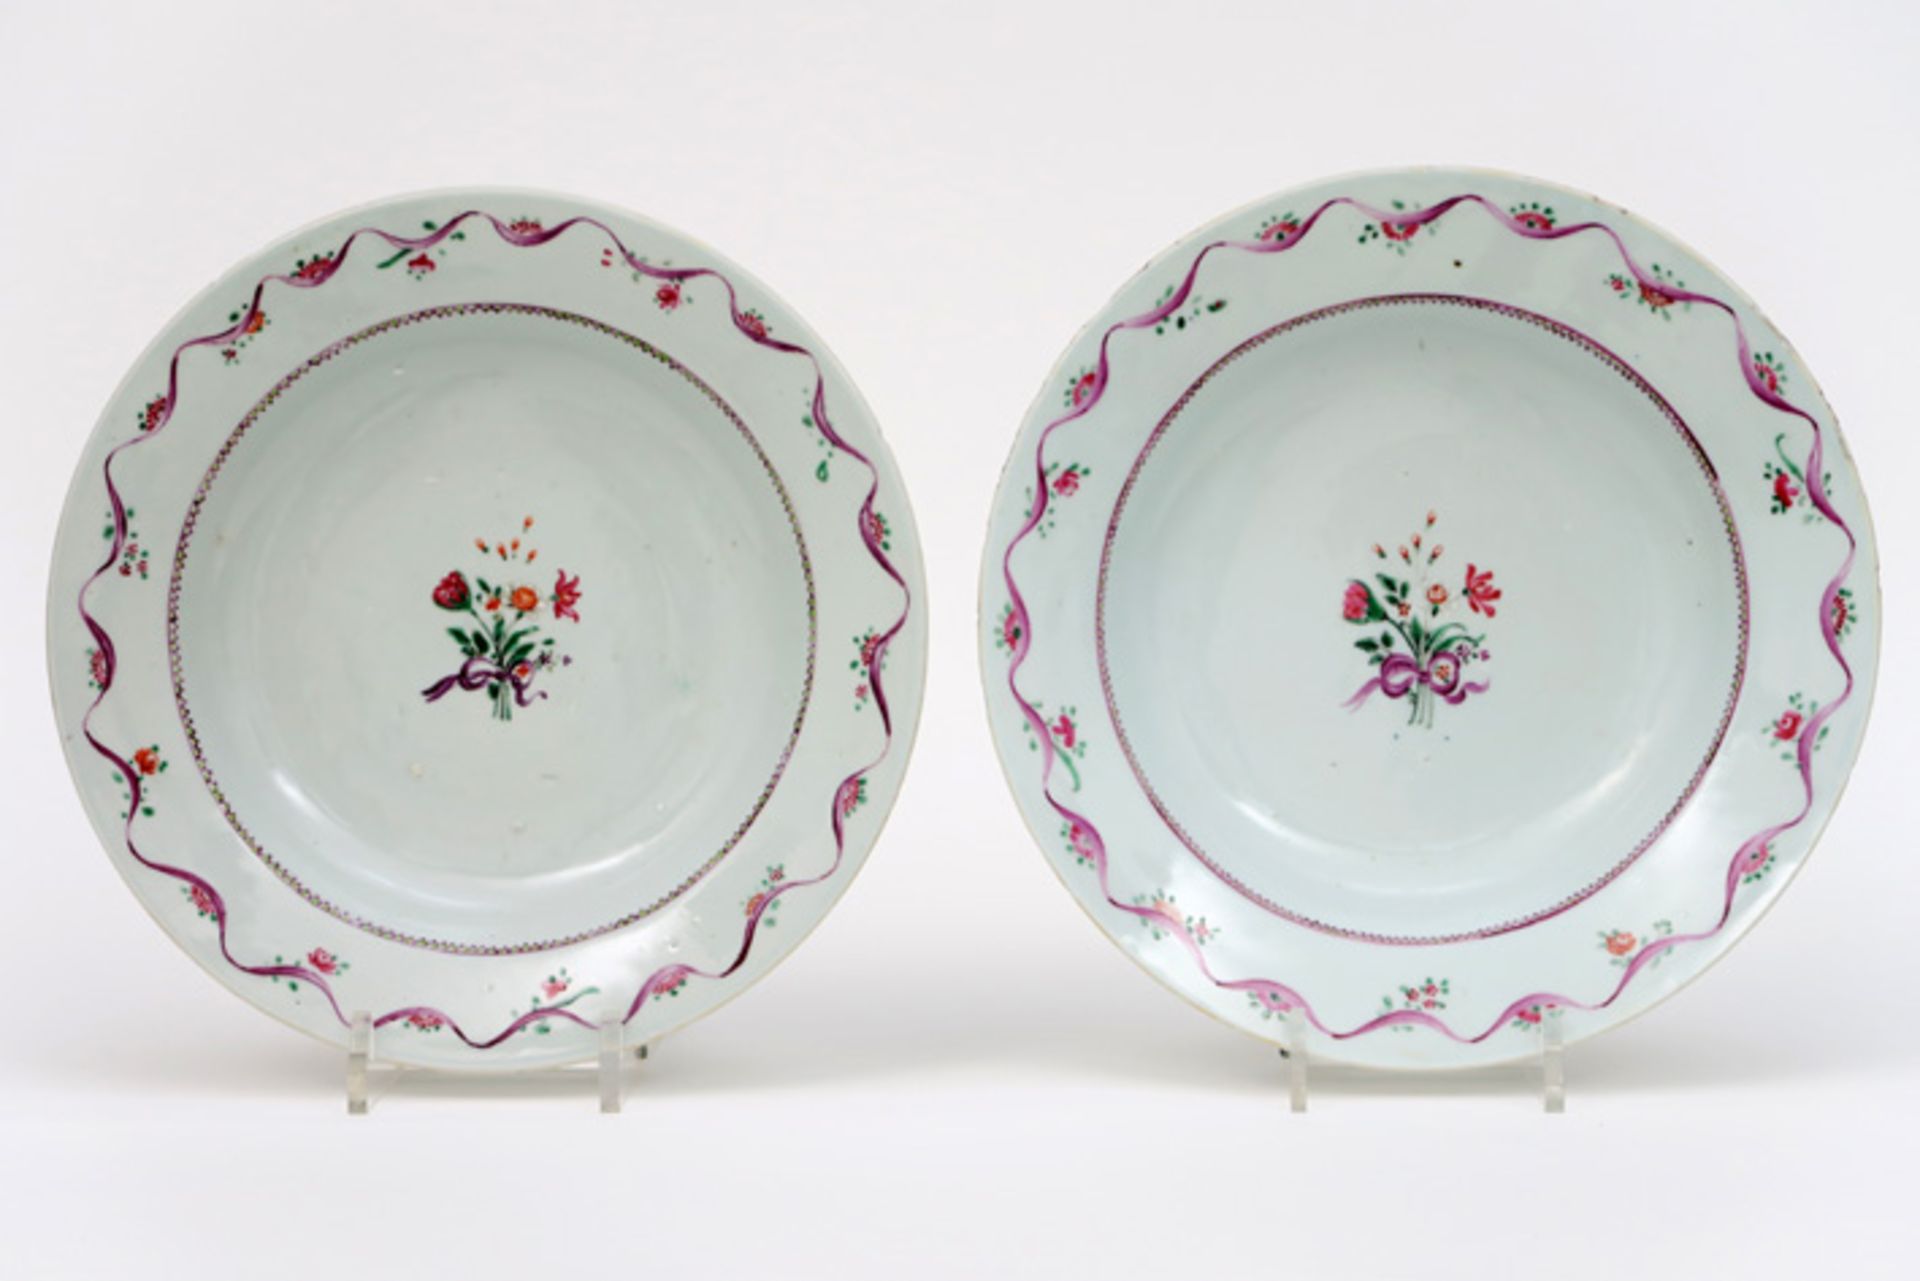 pair of 18th Cent. Chinese " Lowestoft " plates in porcelain with a polychrome decor||Paar